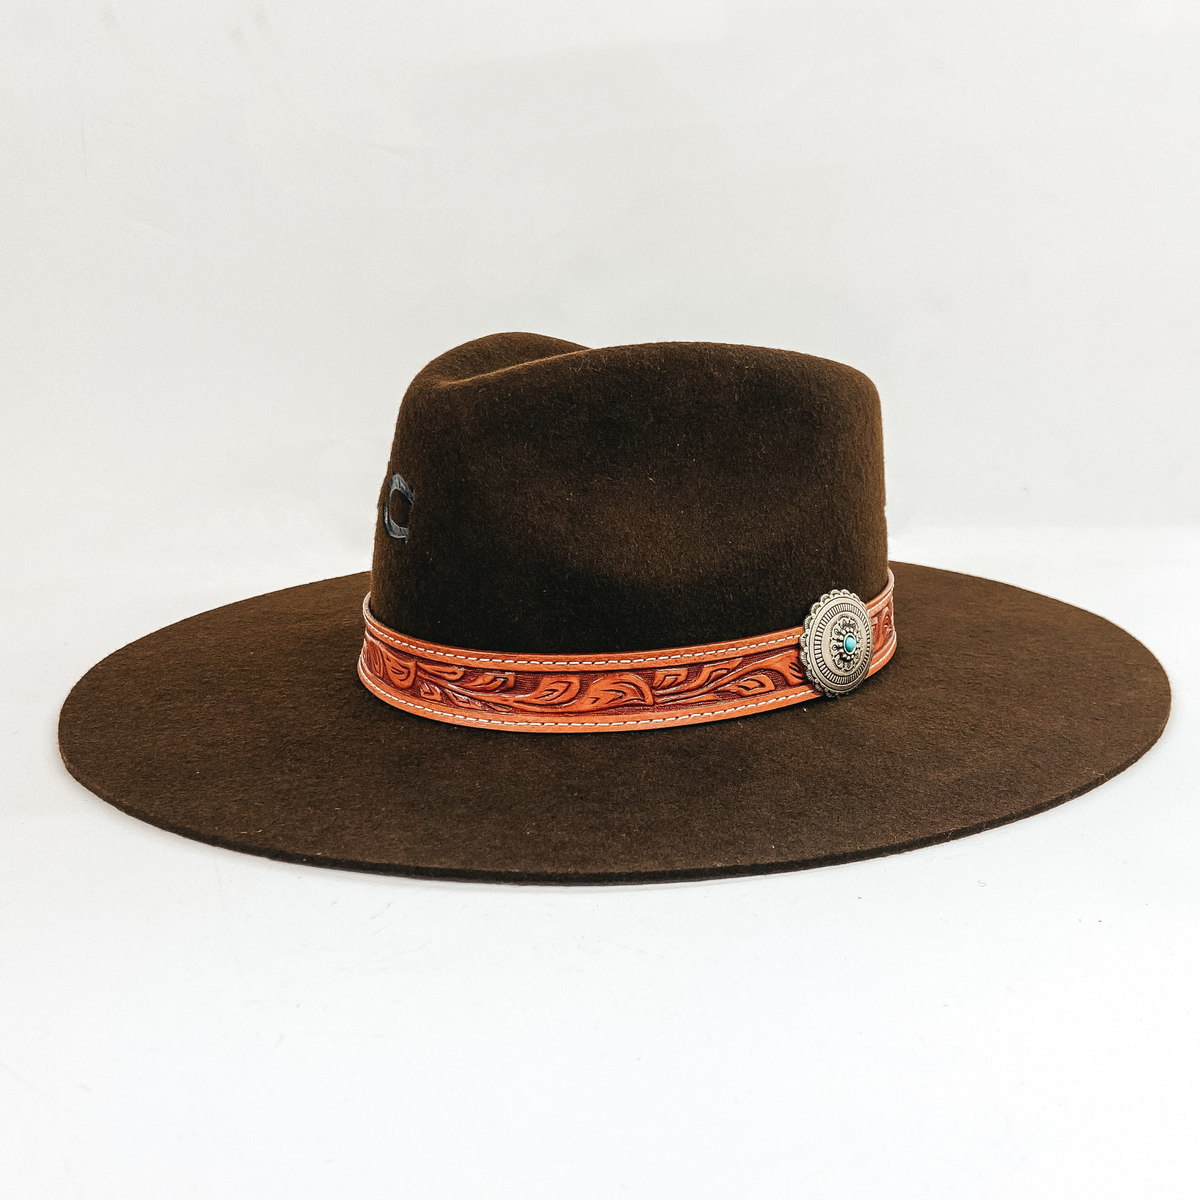 Charlie 1 Horse “White Sands Chocolate” Wool Hat